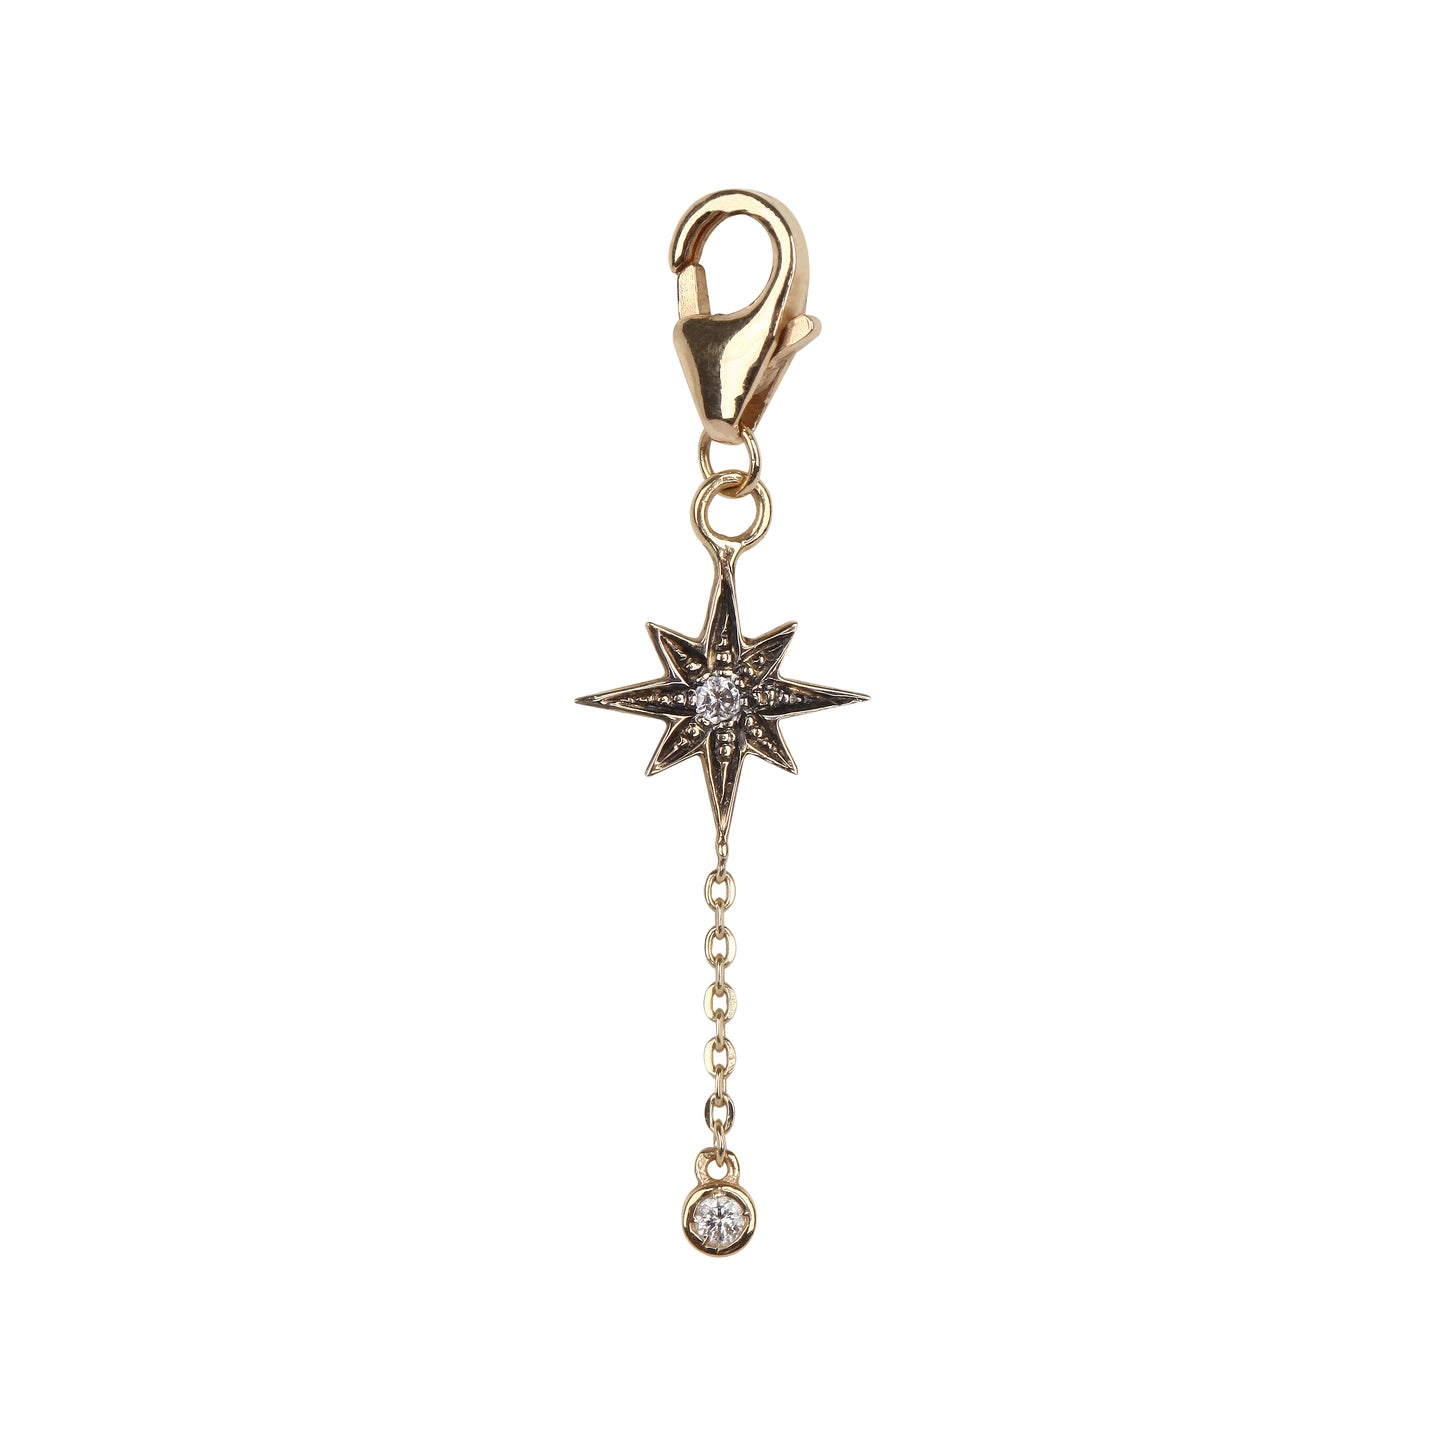 Black rhodium star charm with a diamond drop in yellow gold